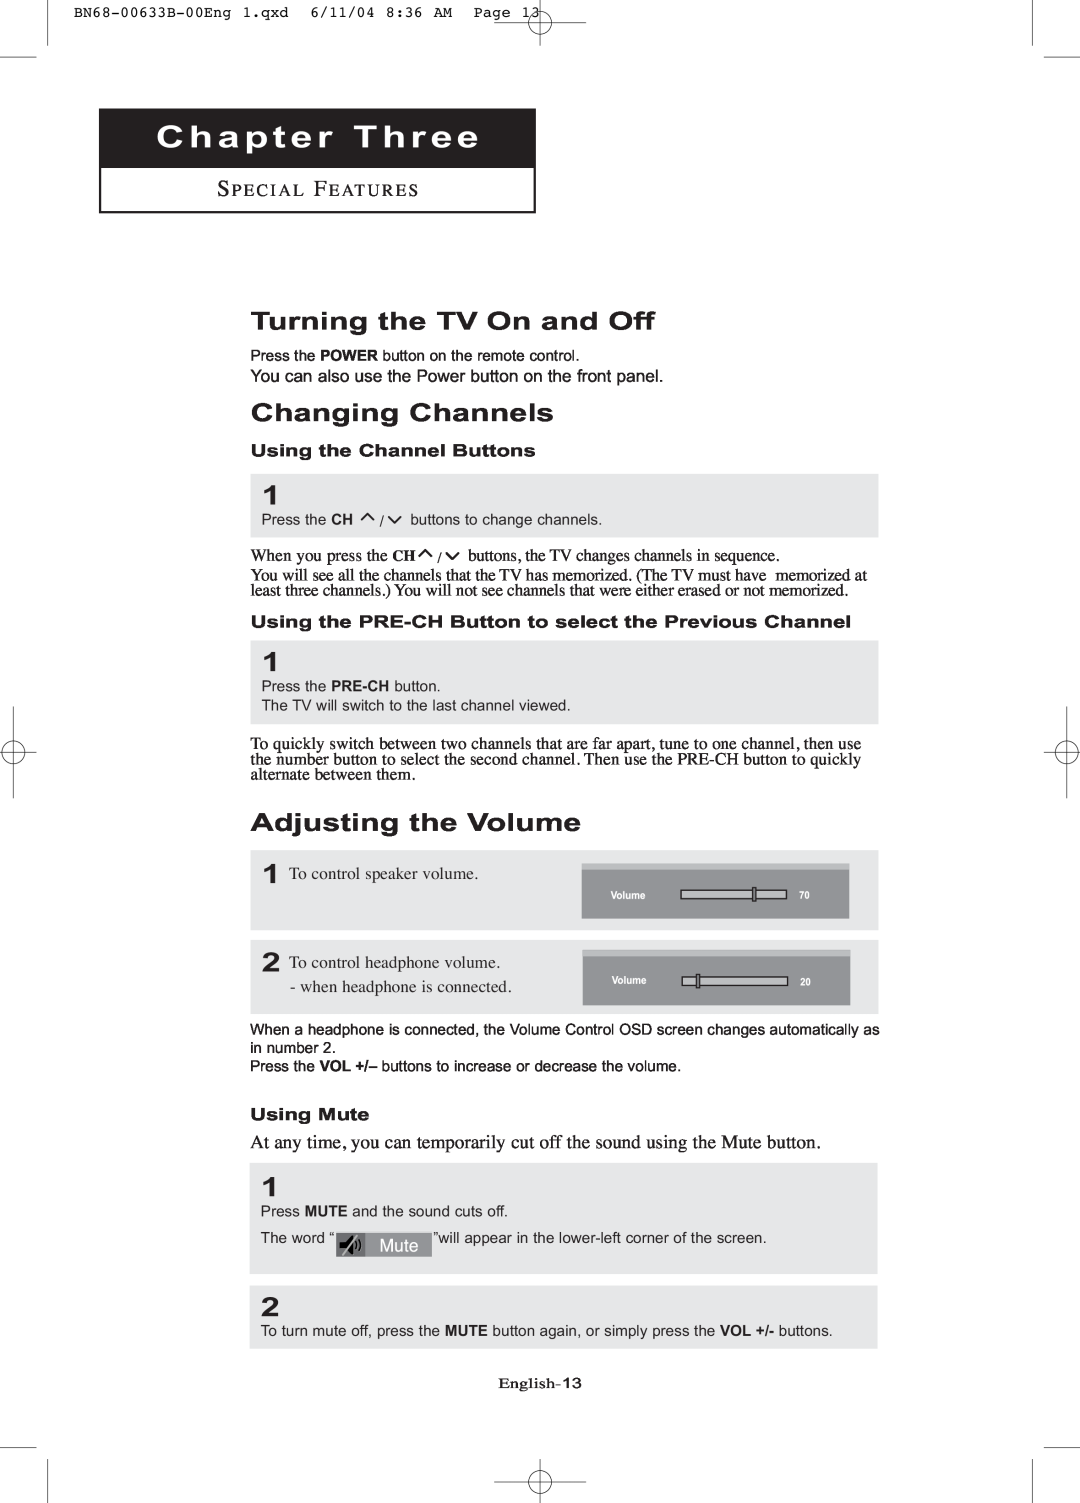 Samsung LT-P1545 manual Chapter Three, Turning the TV On and Off, Changing Channels, Adjusting the Volume, Using Mute 